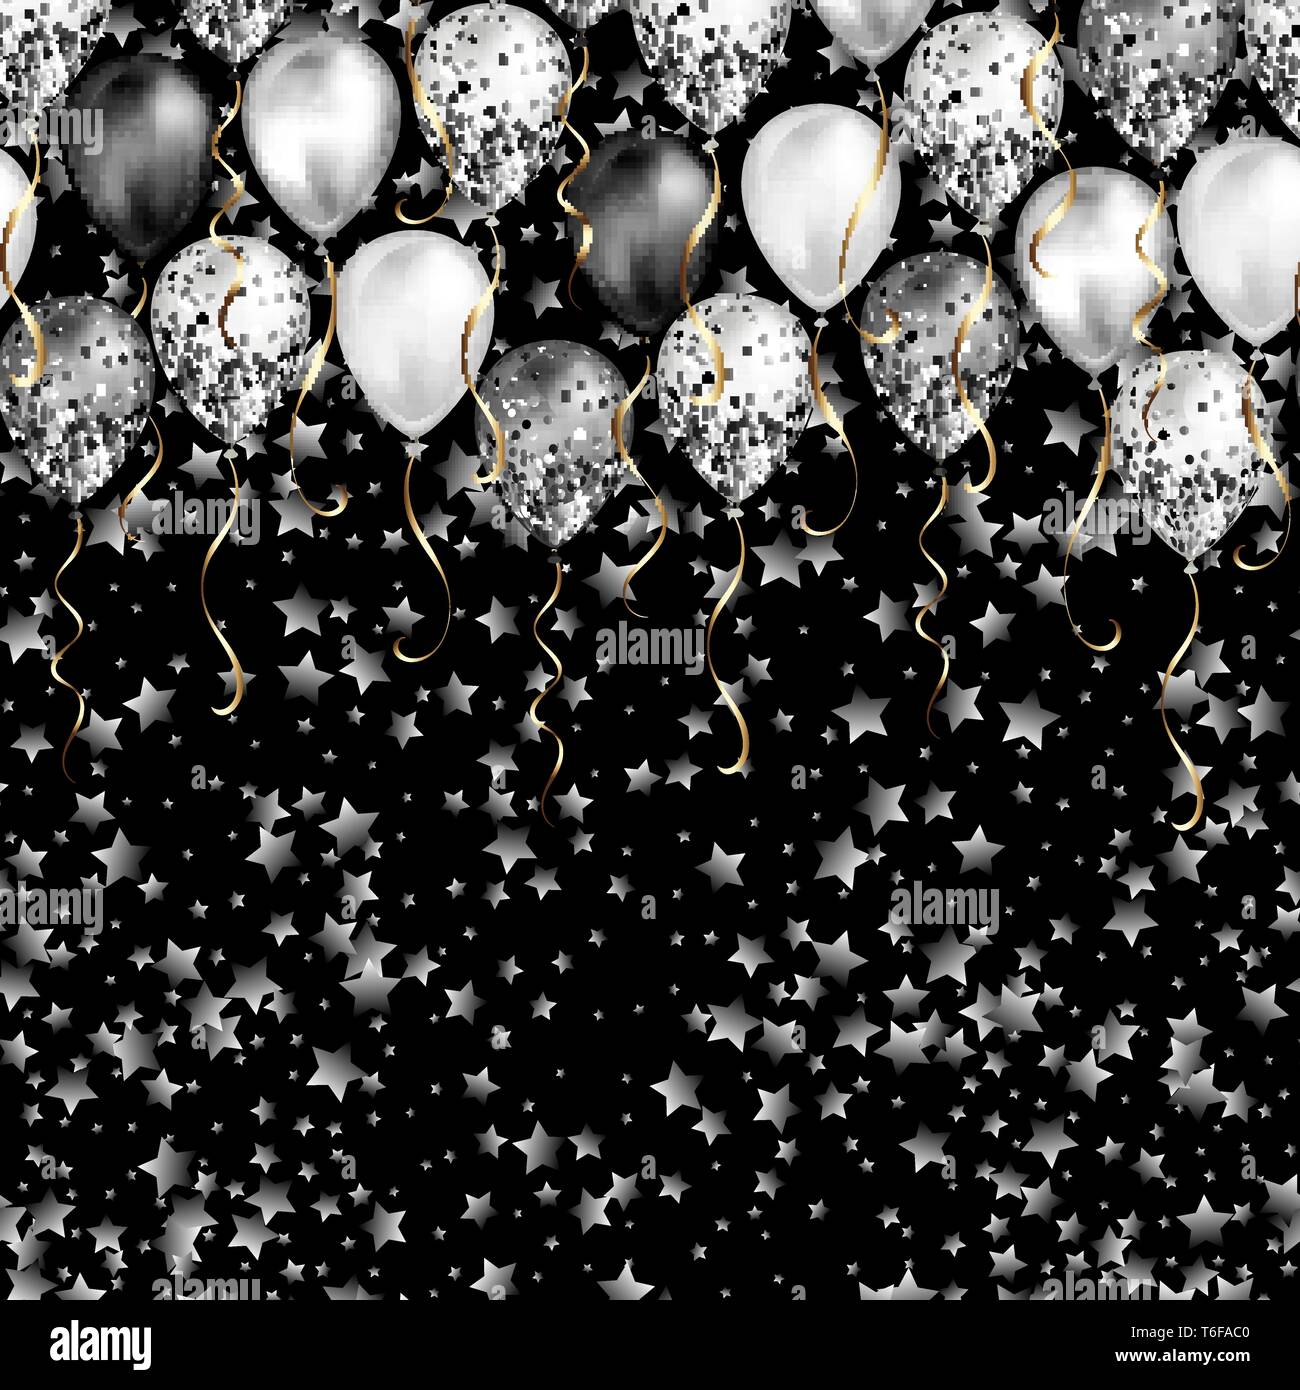 Background With Stars Confetti And Black And White